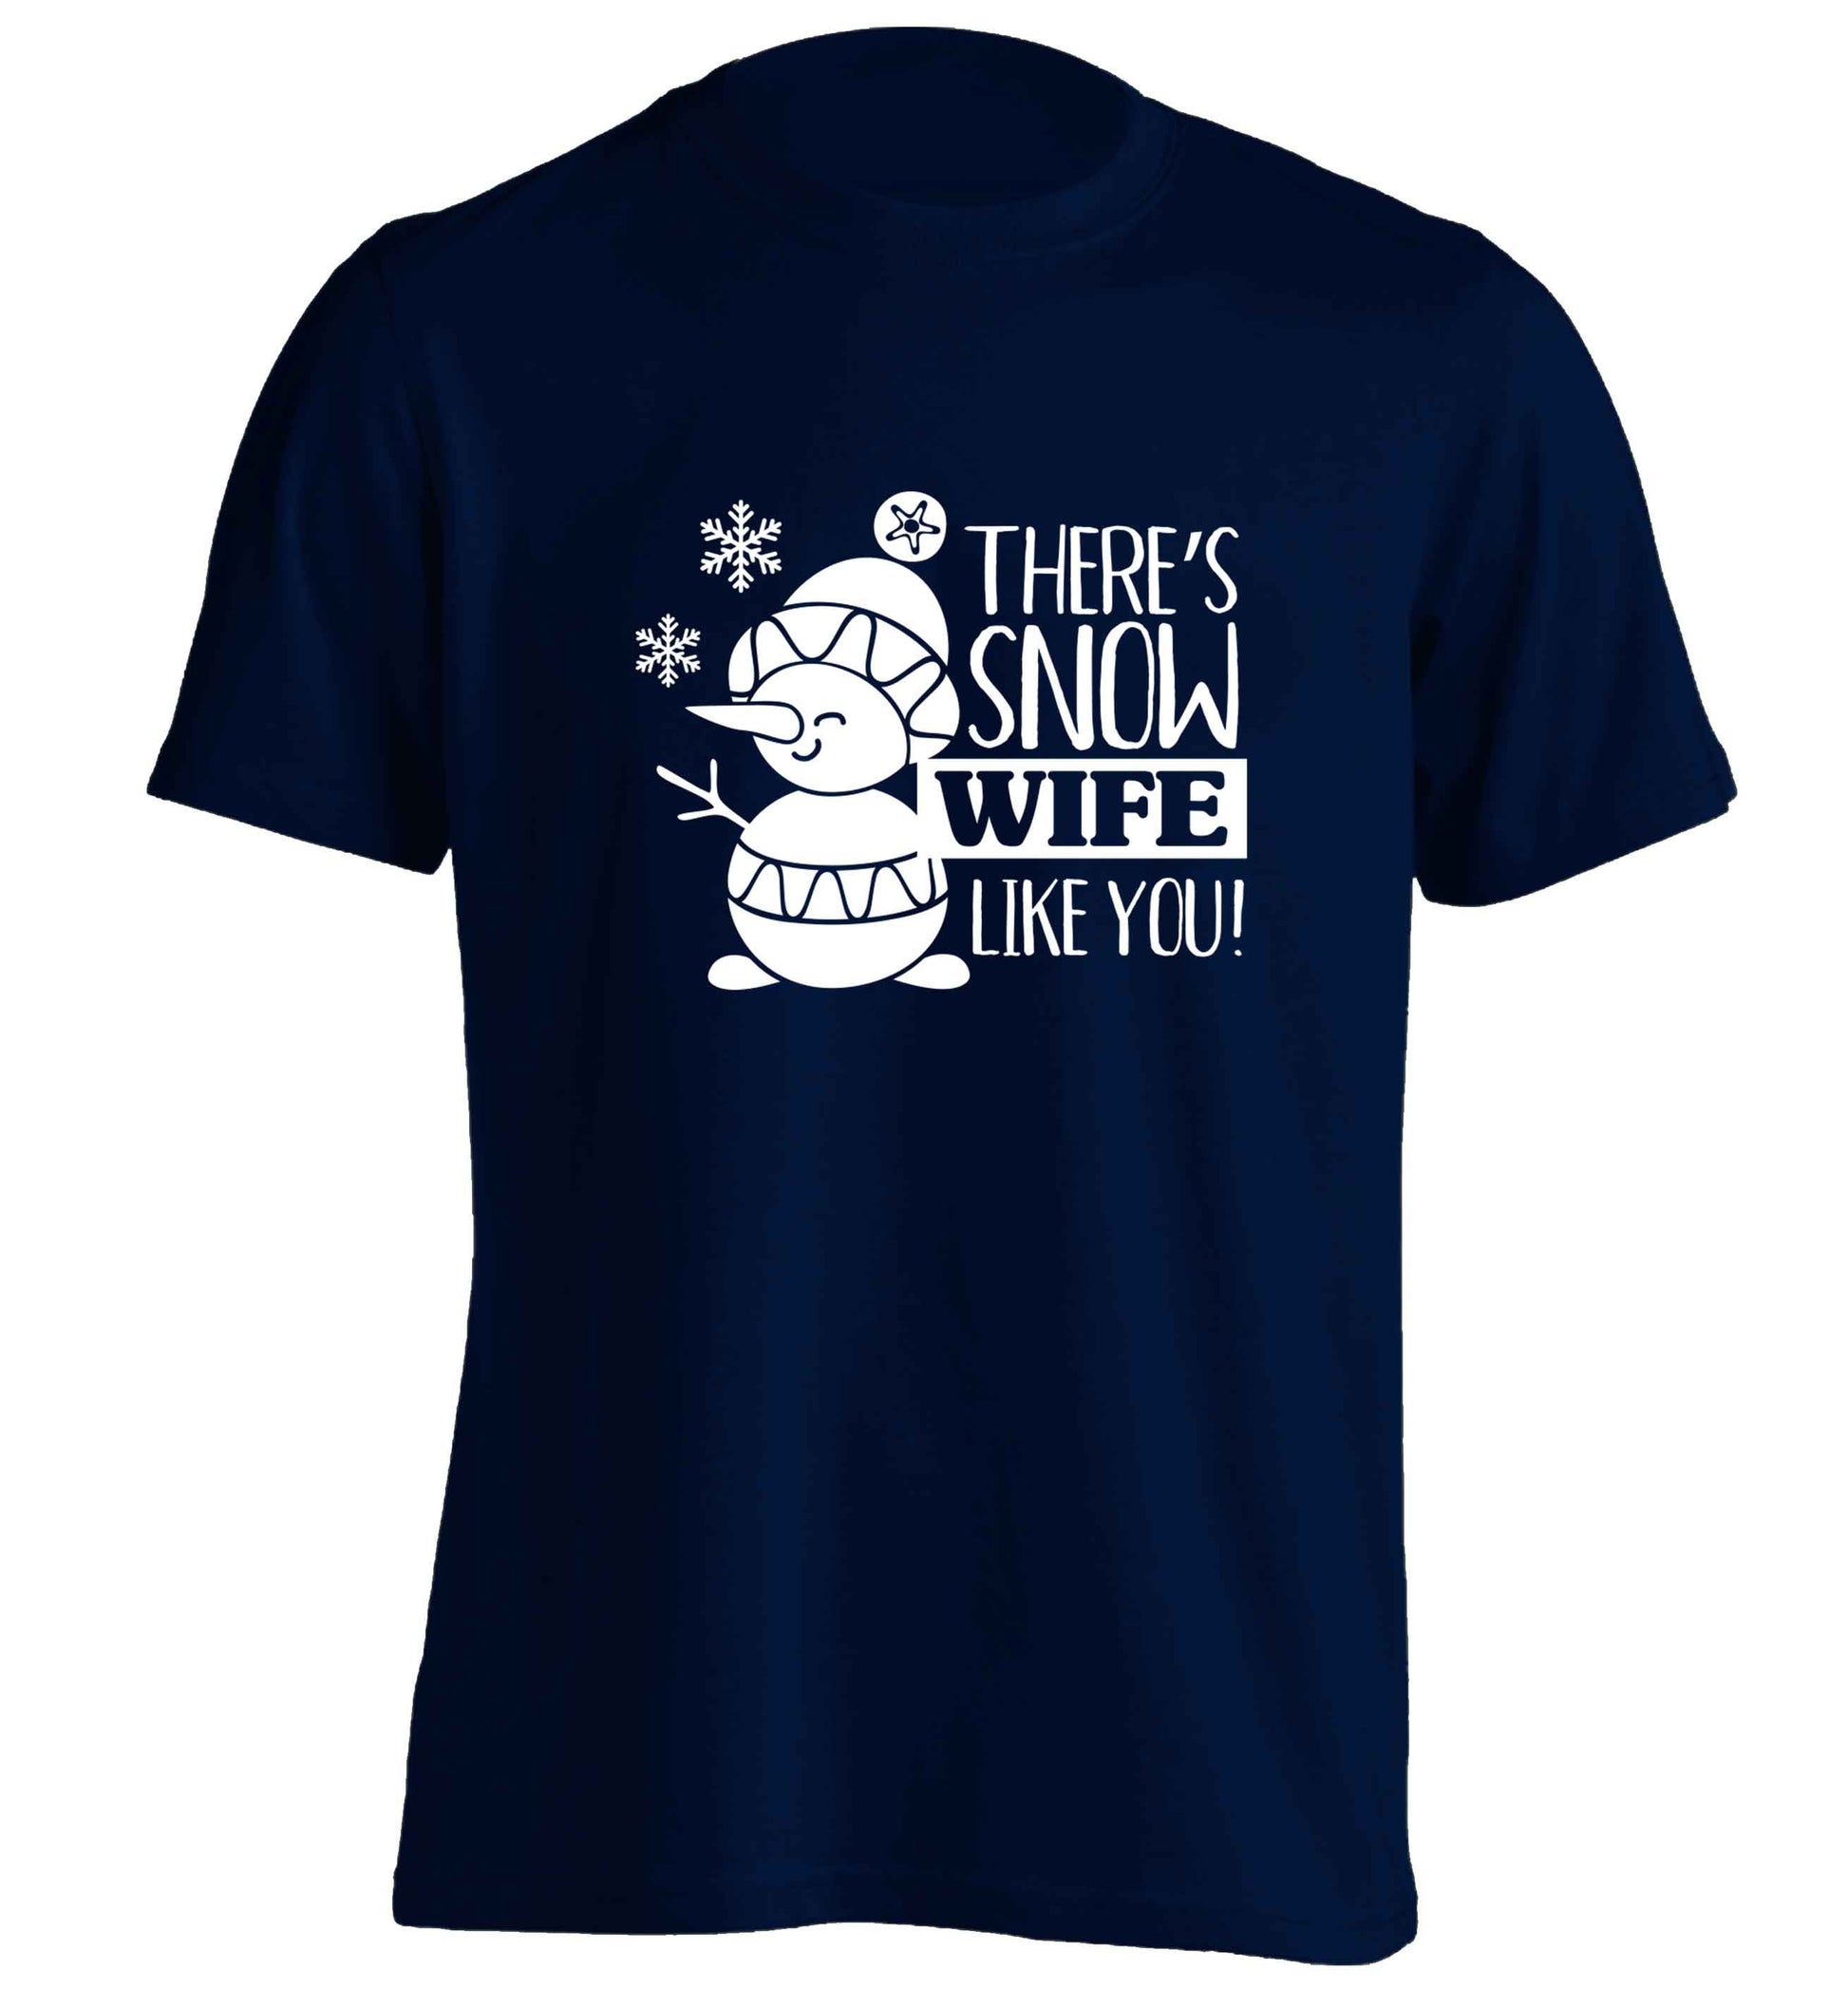 There's snow wife like you adults unisex navy Tshirt 2XL